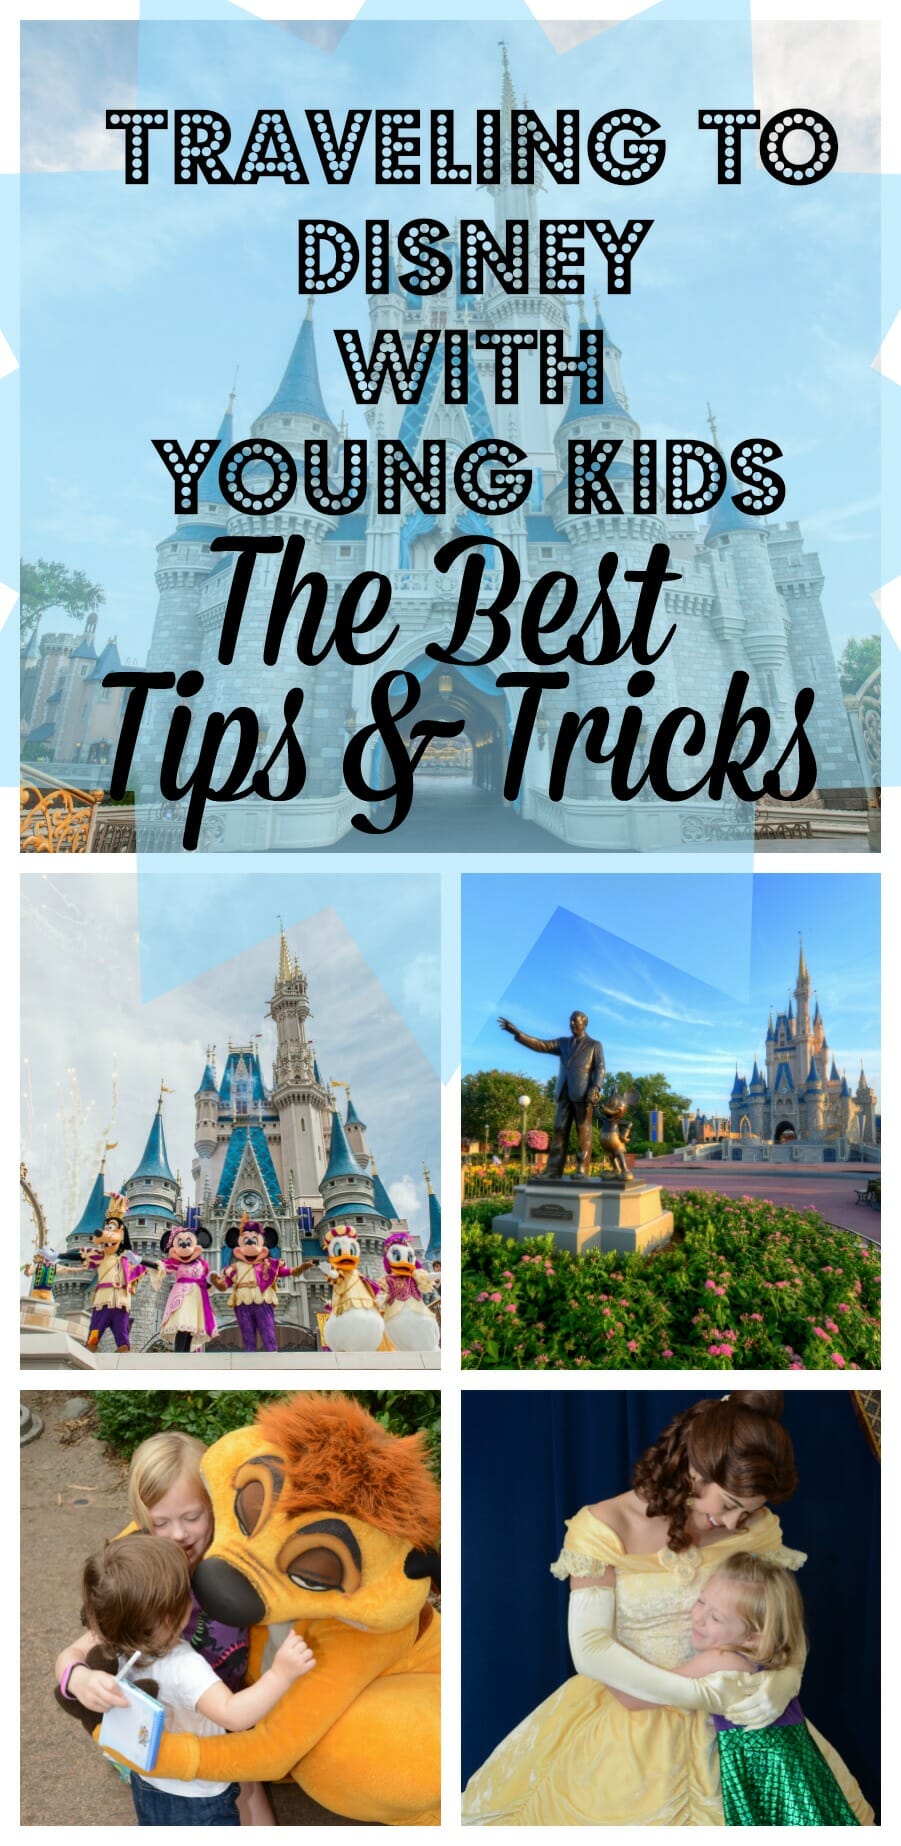 How to Travel to Disney with Young Kids, including toddlers or preschoolers! How to plan the perfect trip to Disney without any stress!